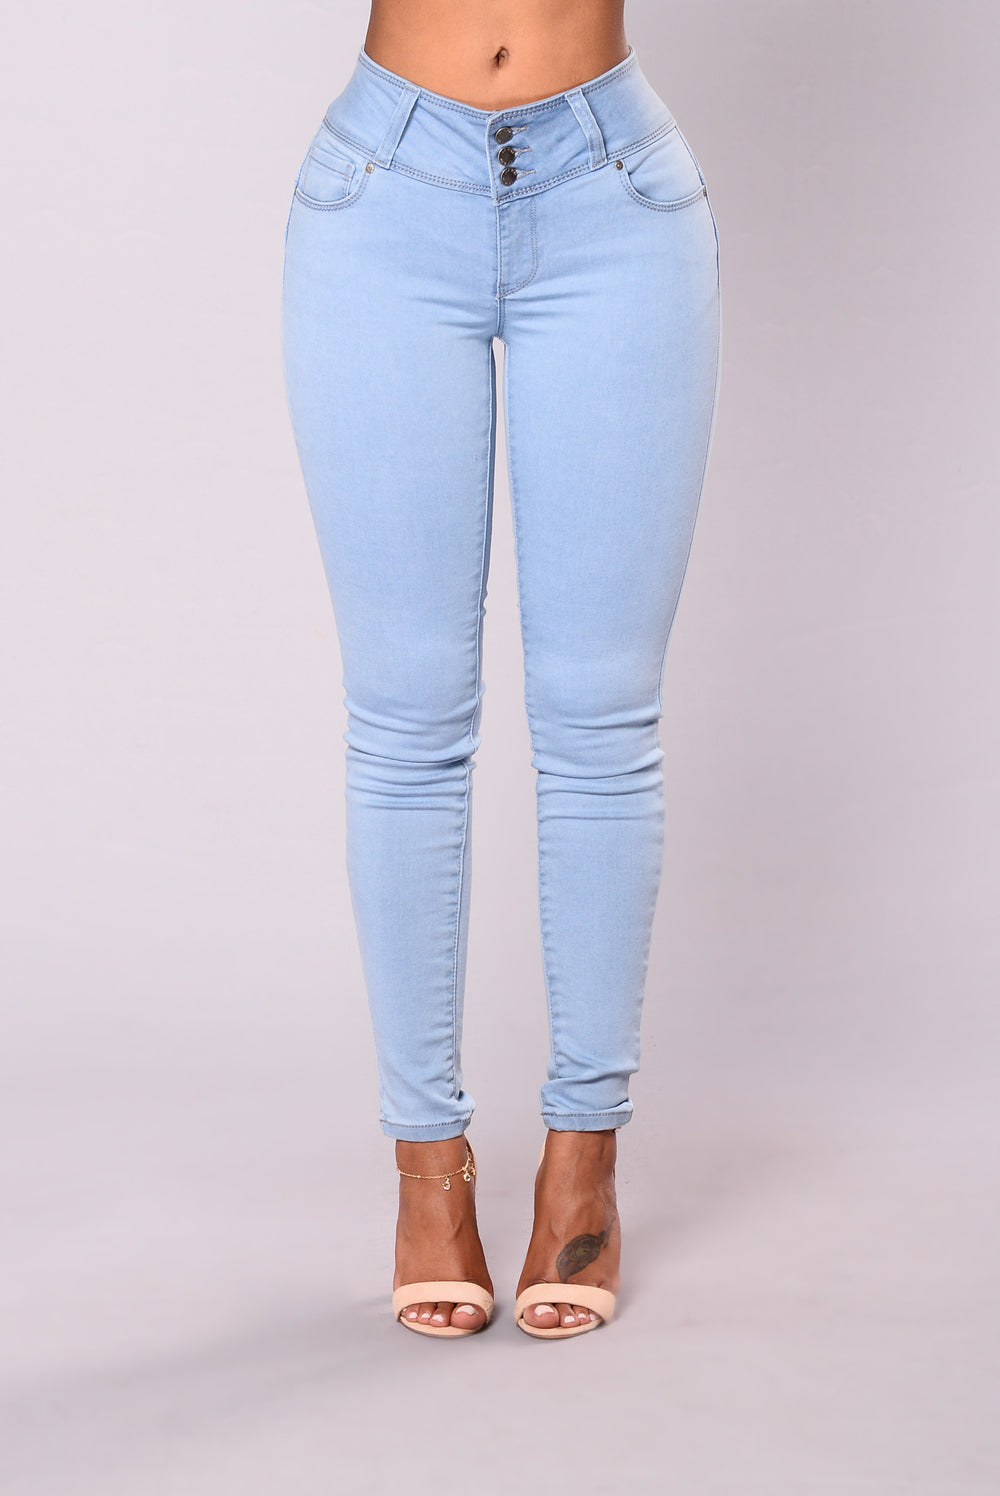 Round Of Applause Booty Shaped Jeans Light Blue 